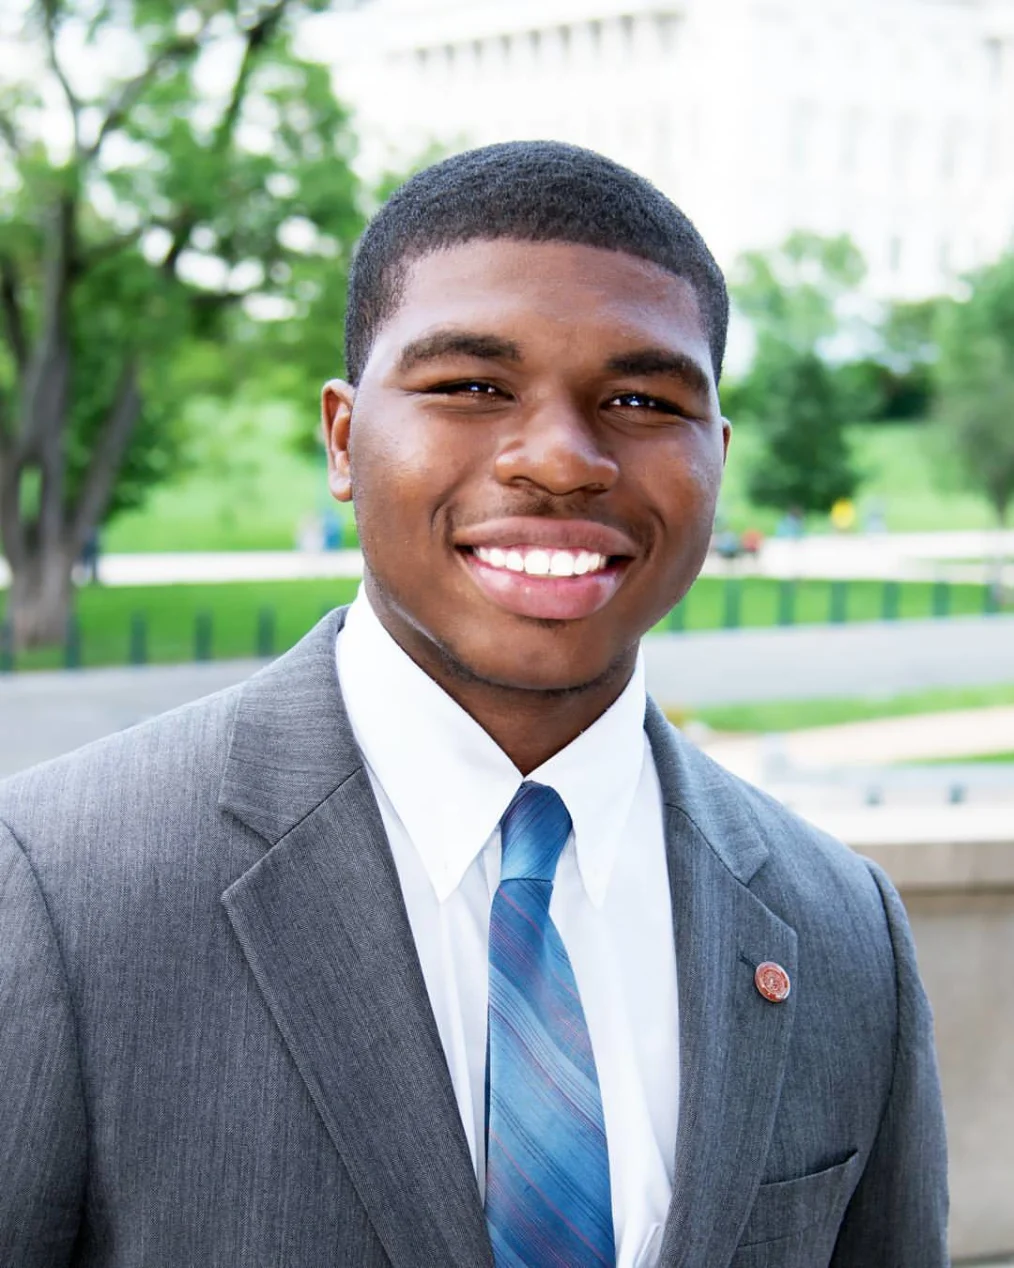 A chest up photo of a young man with medium-deep tone skin, low black hair. He has a nice white smile. He is wearing grey suit, with a white button up shirt underneath, and a tie thats pattern is a bunch of thin lines of blue shades. He is in focus of the camera while the background is a blue of a monument or museum park.  